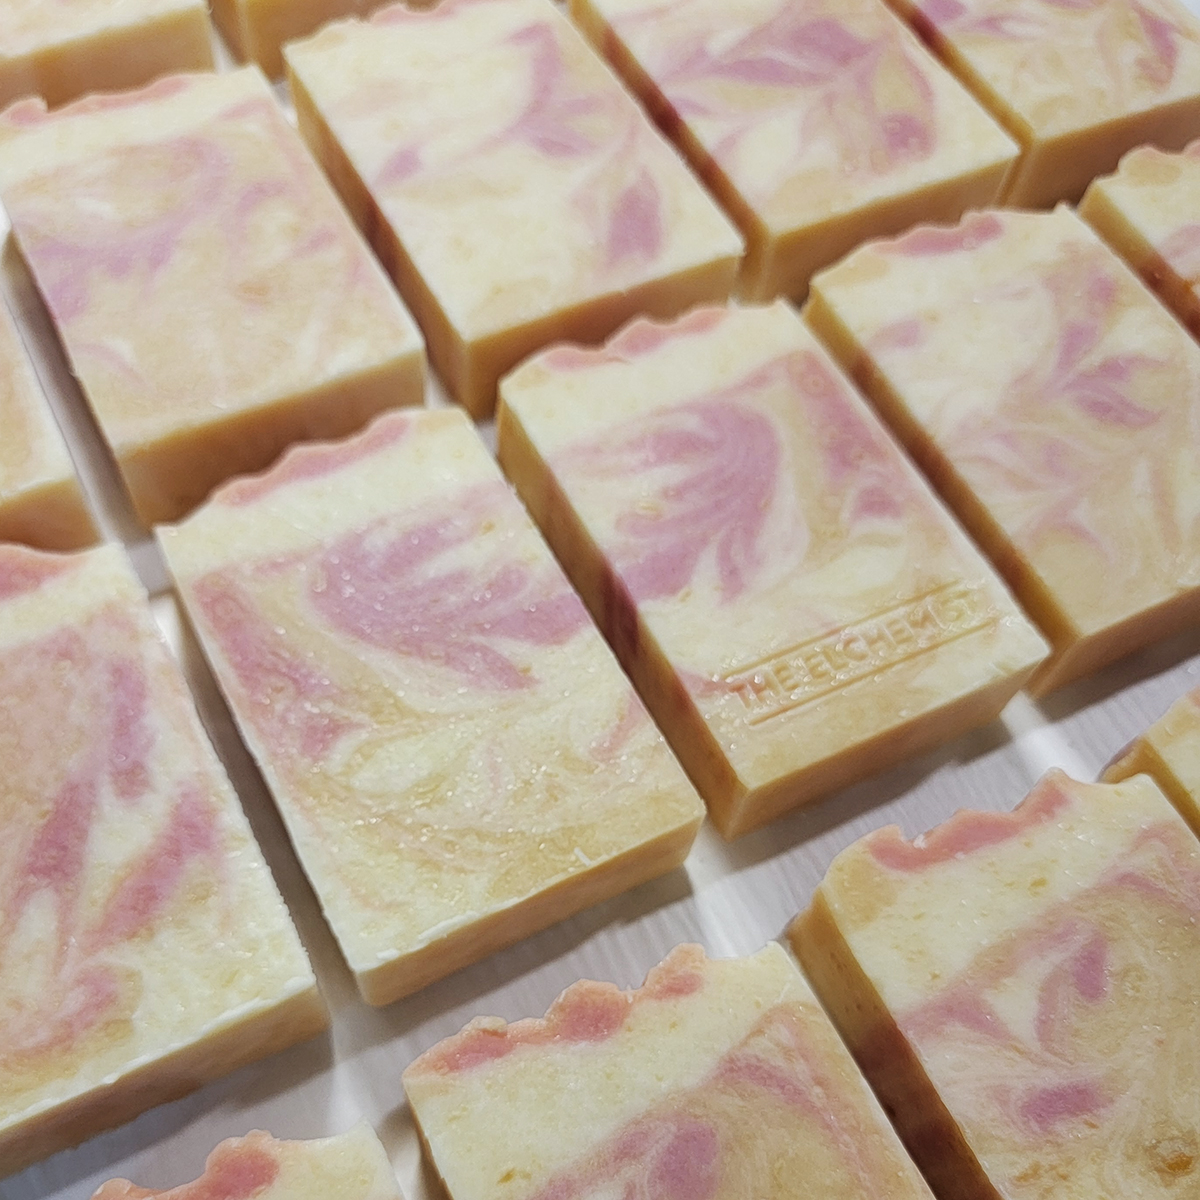 The Elchemist - Malaysia bar soaps in rows